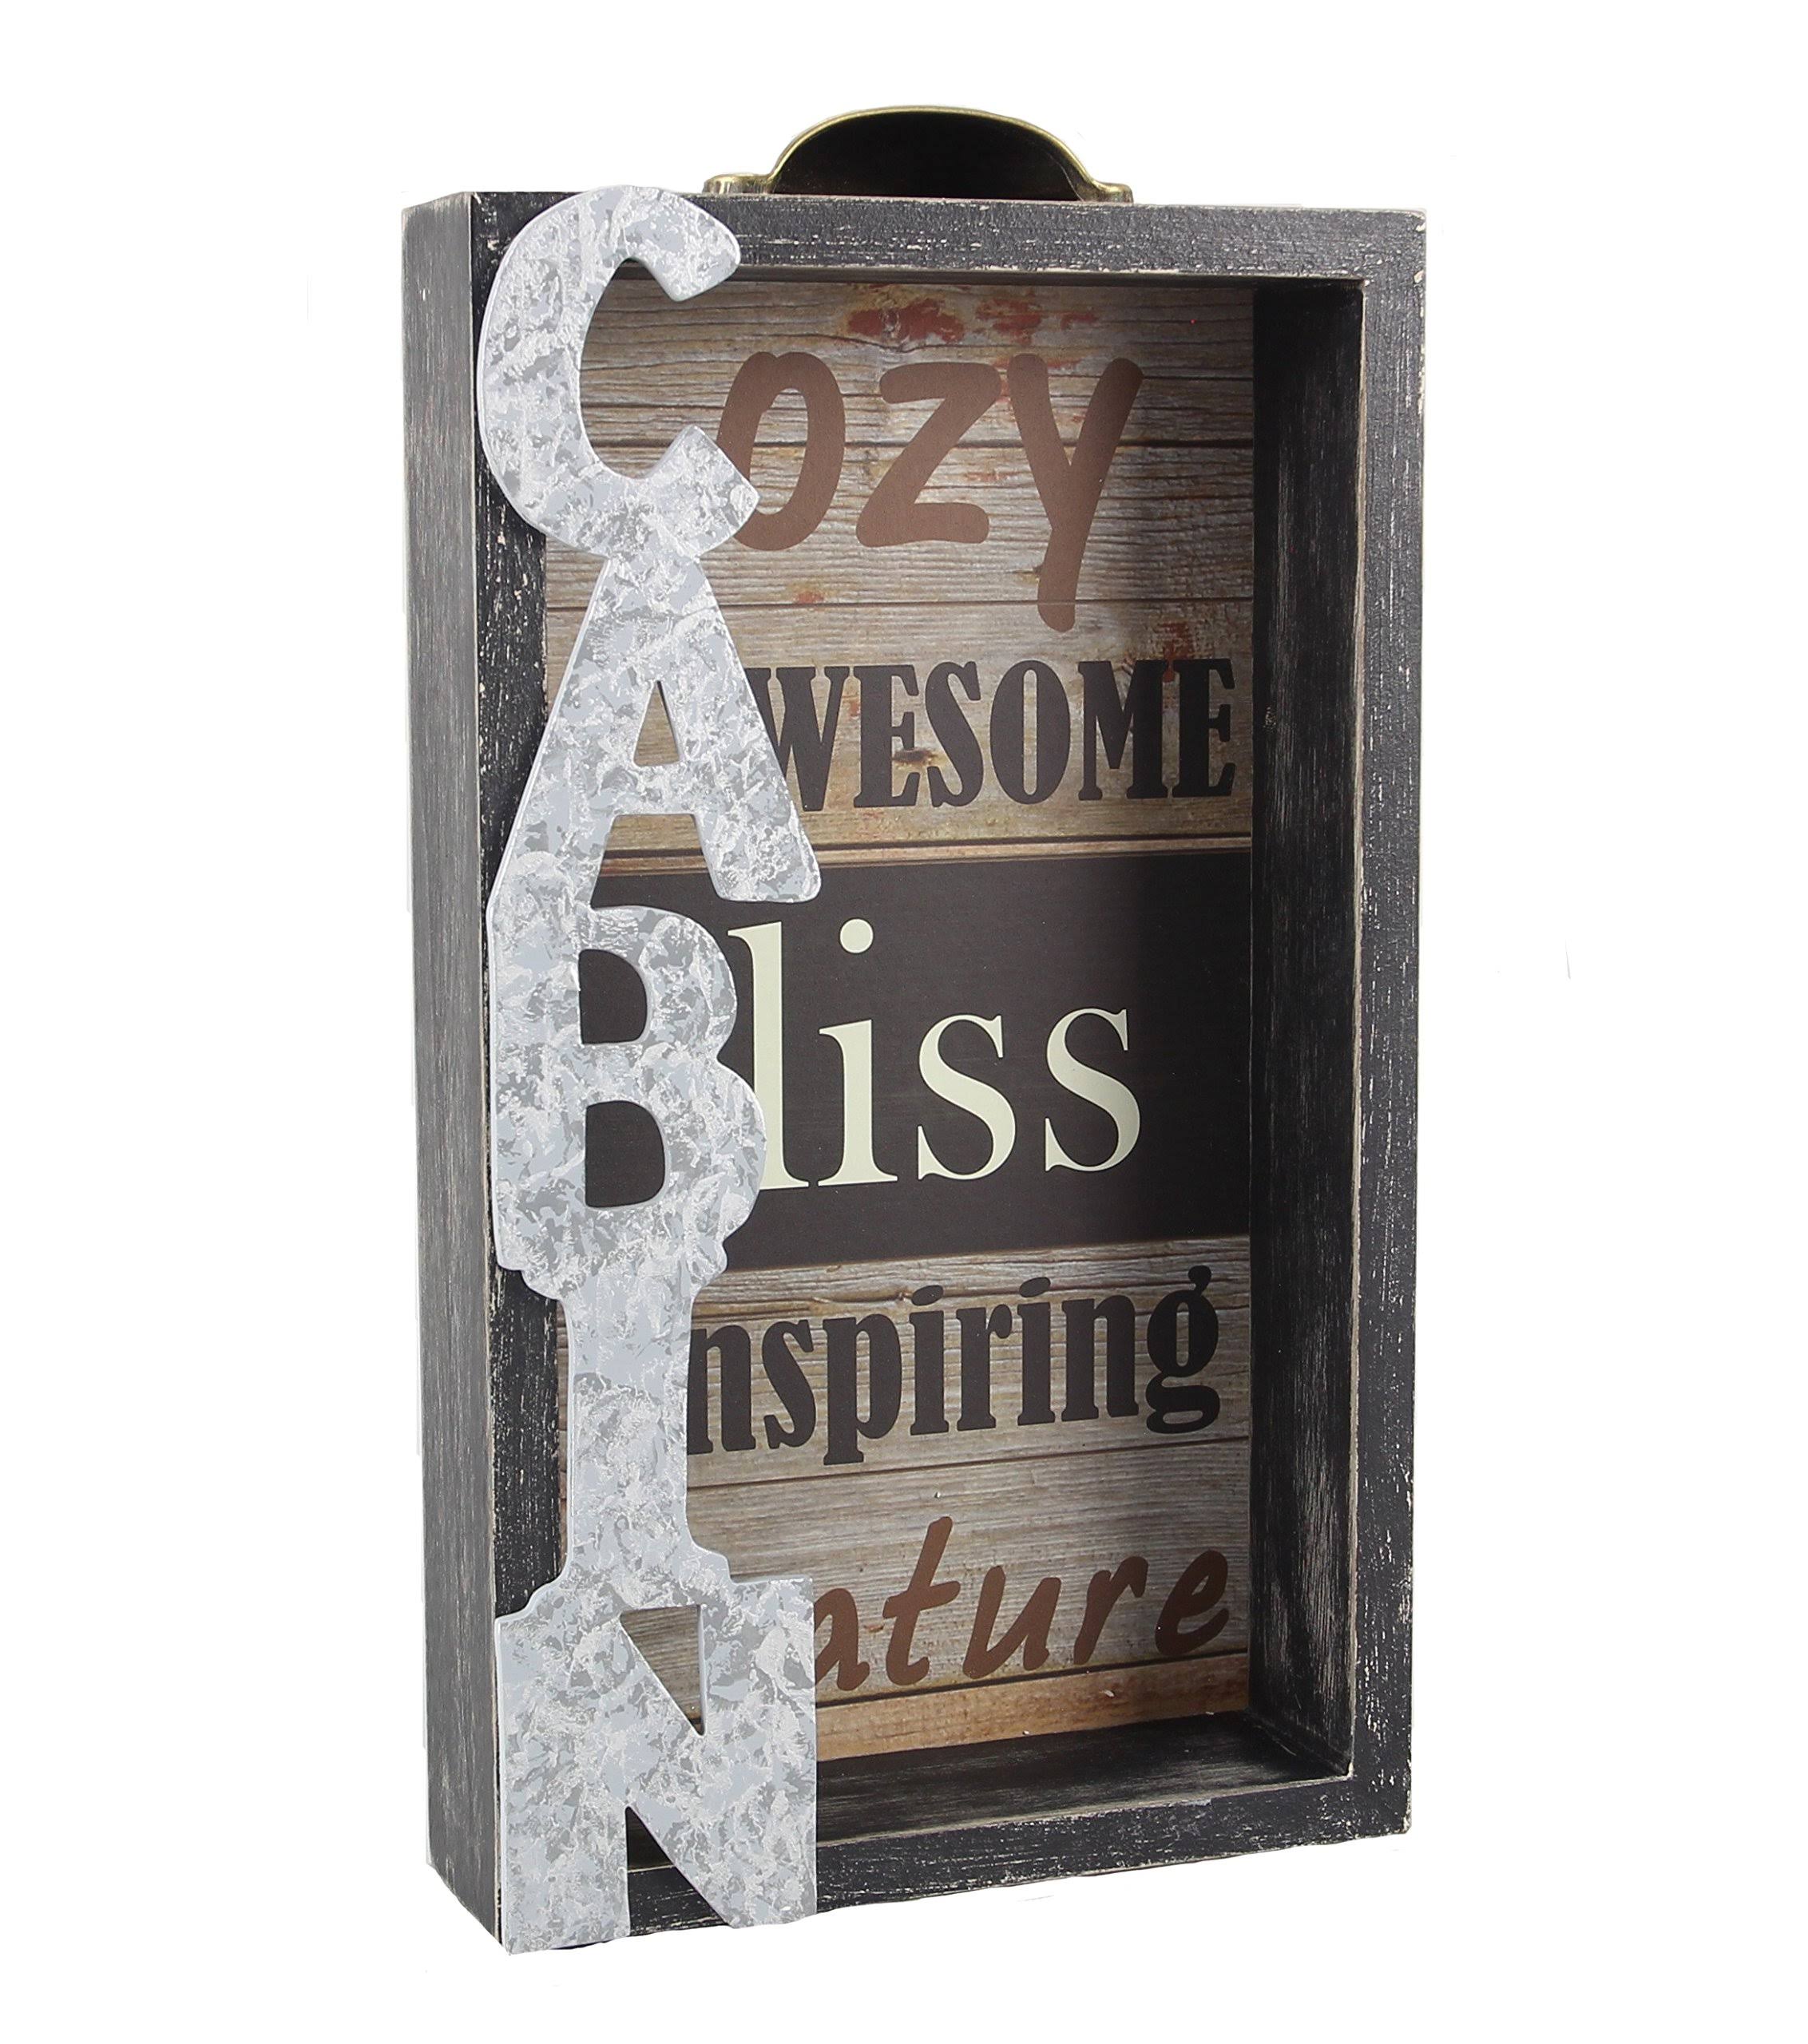 Young's 7" x 2" x 12.5" Wood Cabin Box Wall Sign